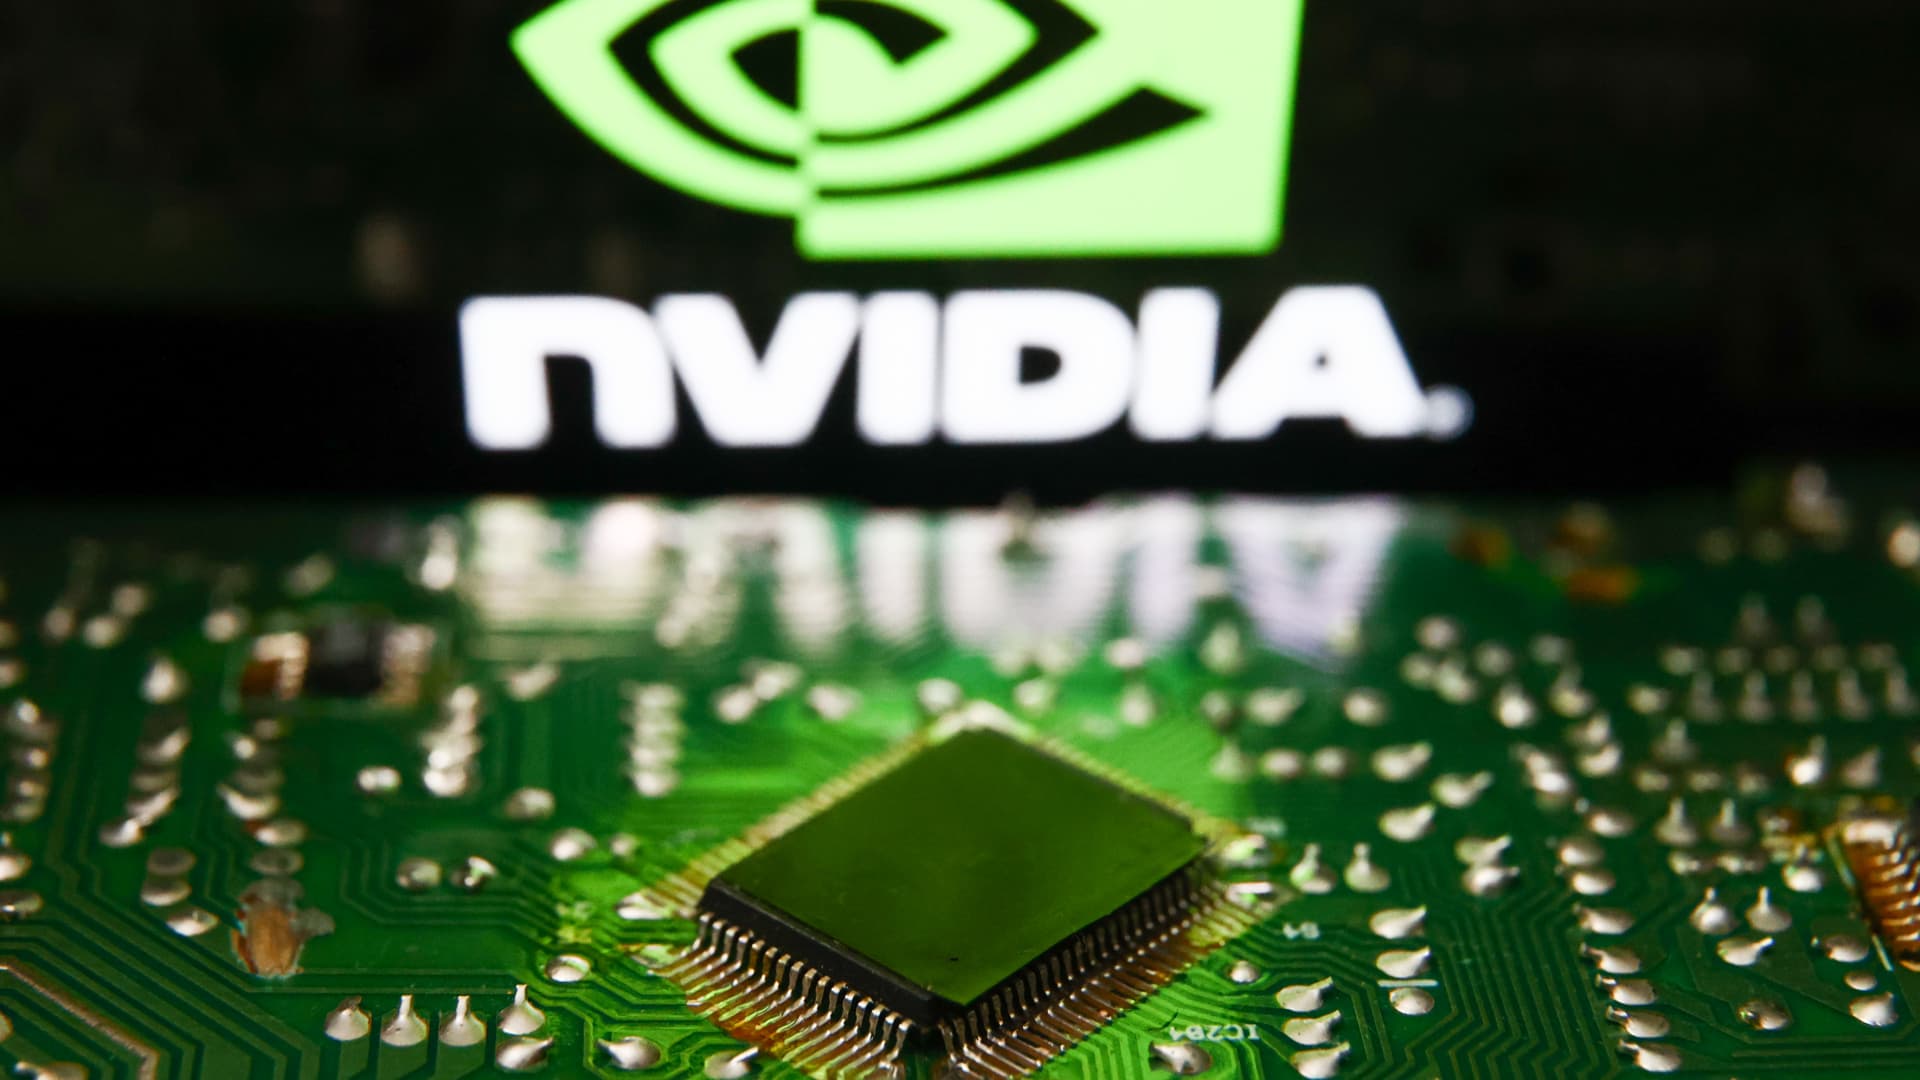 Nvidia to develop new chips that comply with U.S. export regulations